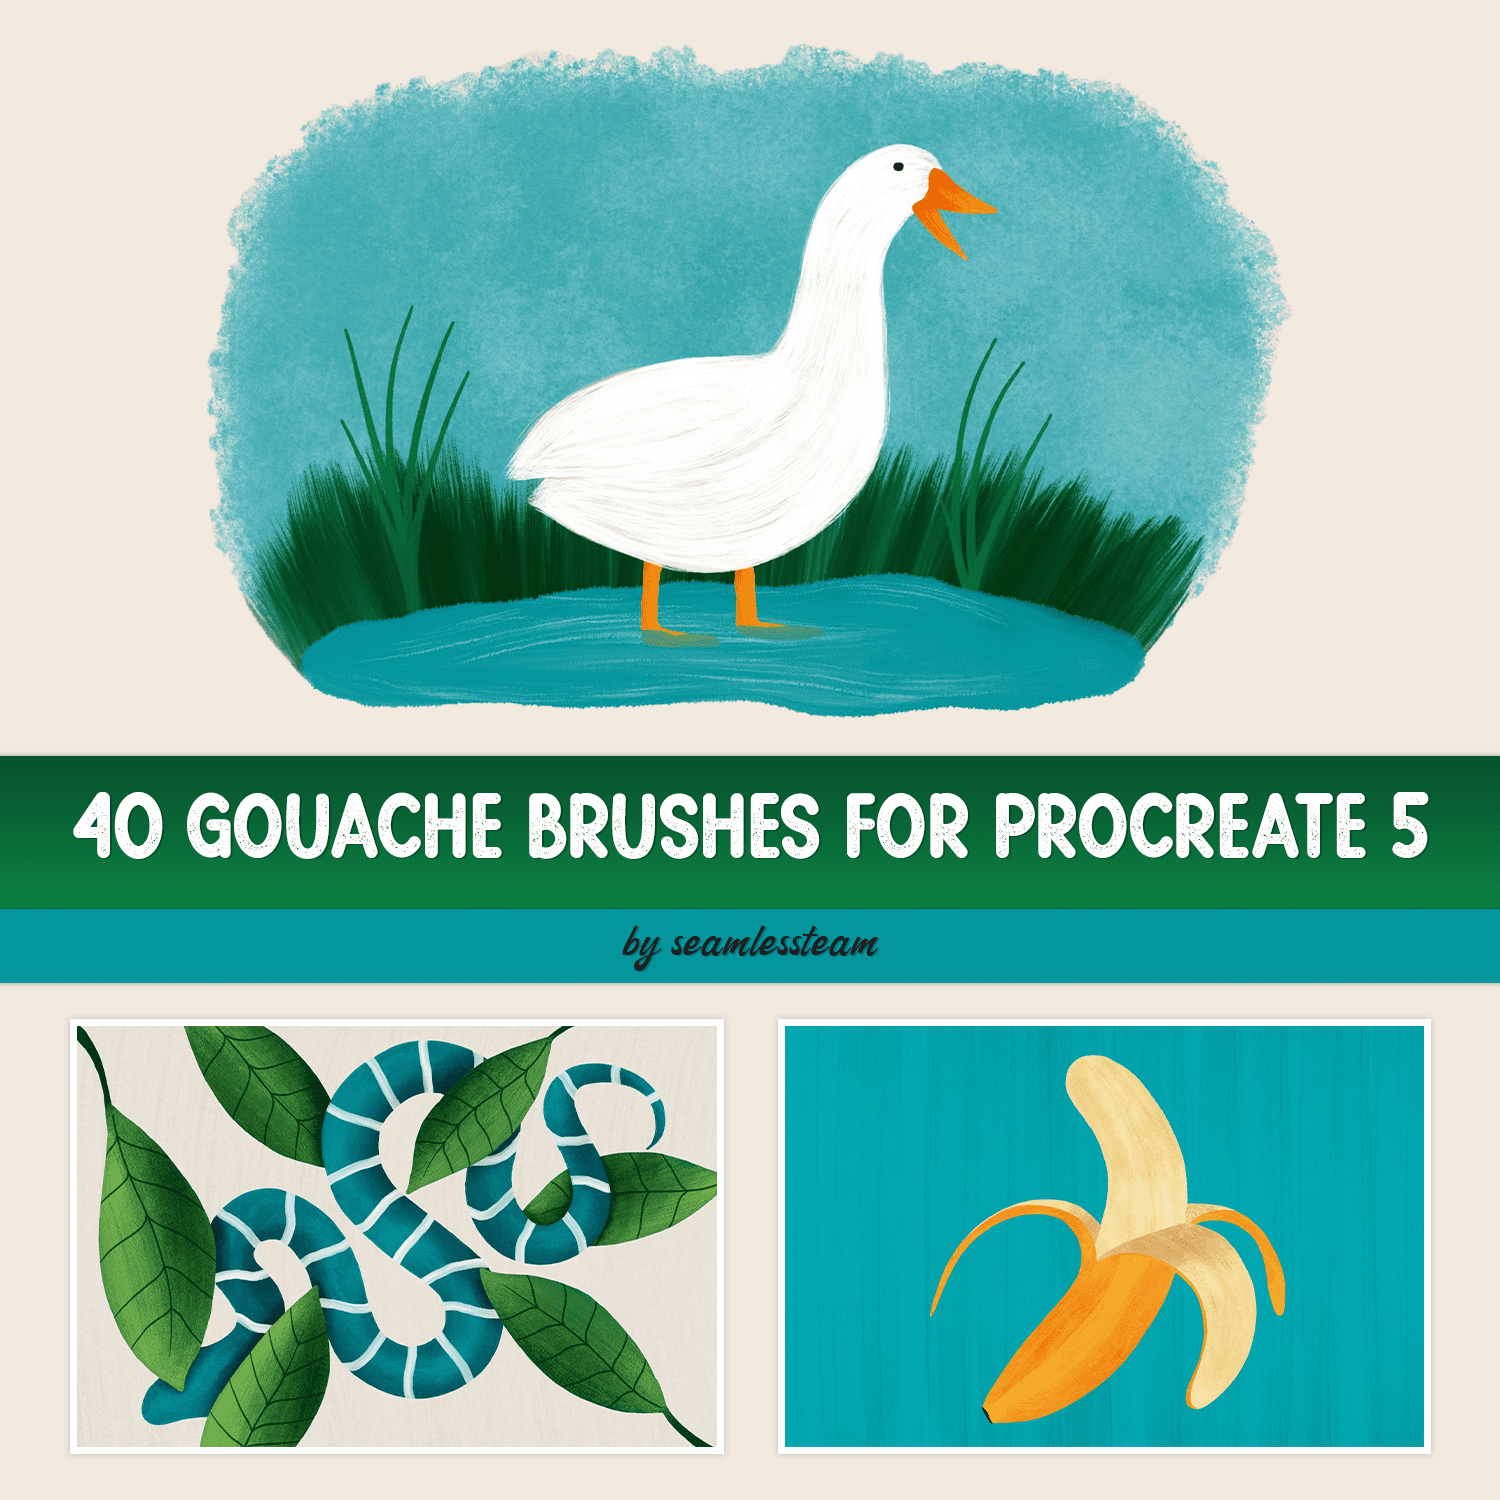 40 Gouache Brushes For Procreate 5 Cover.